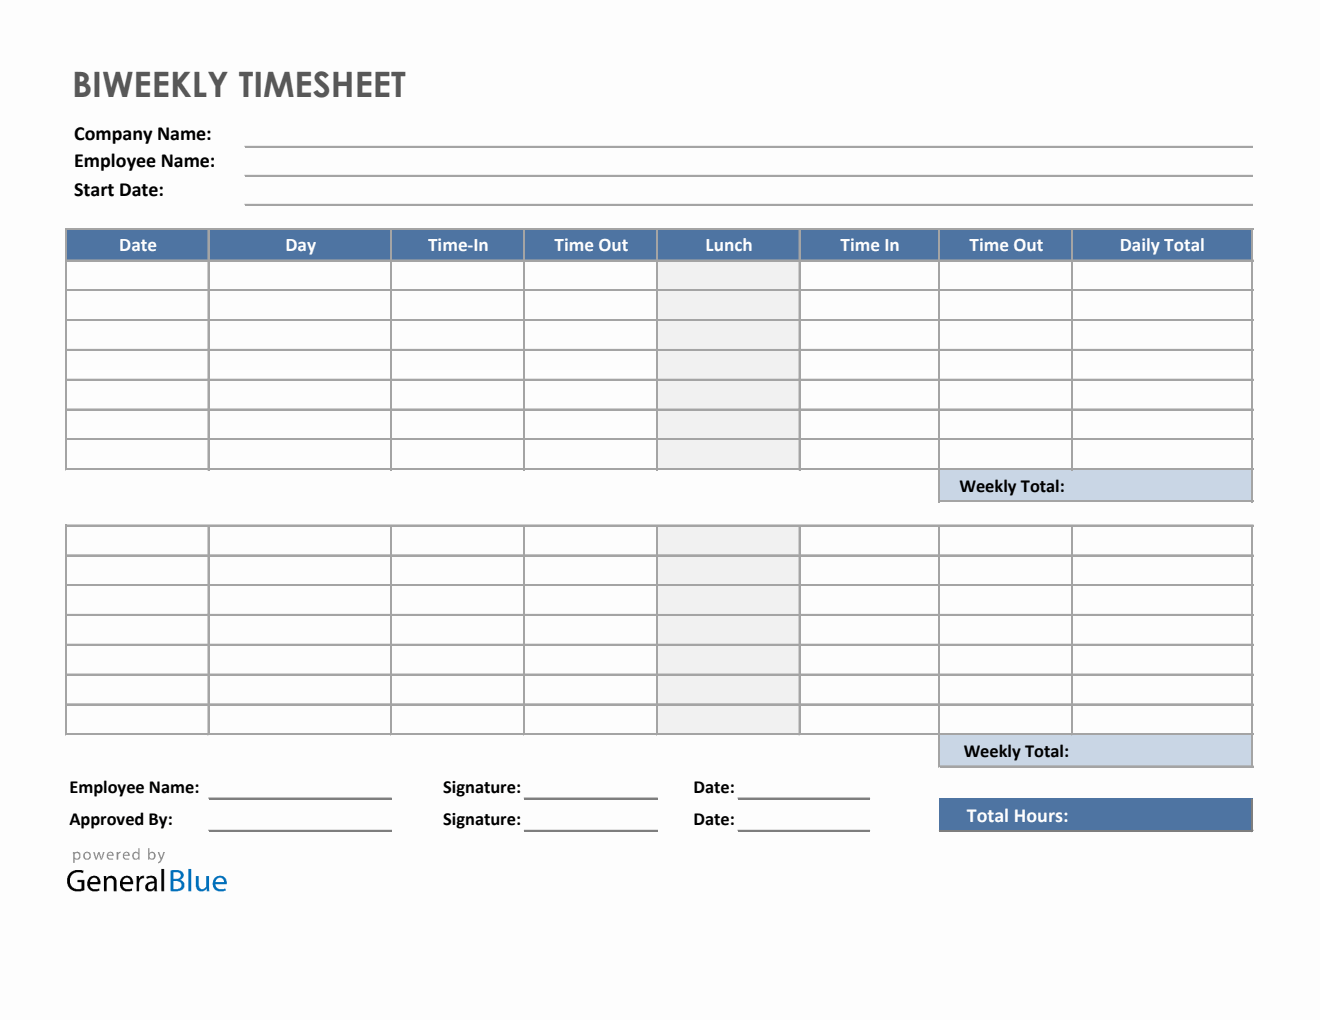 How To Create A Biweekly Timesheet In Excel